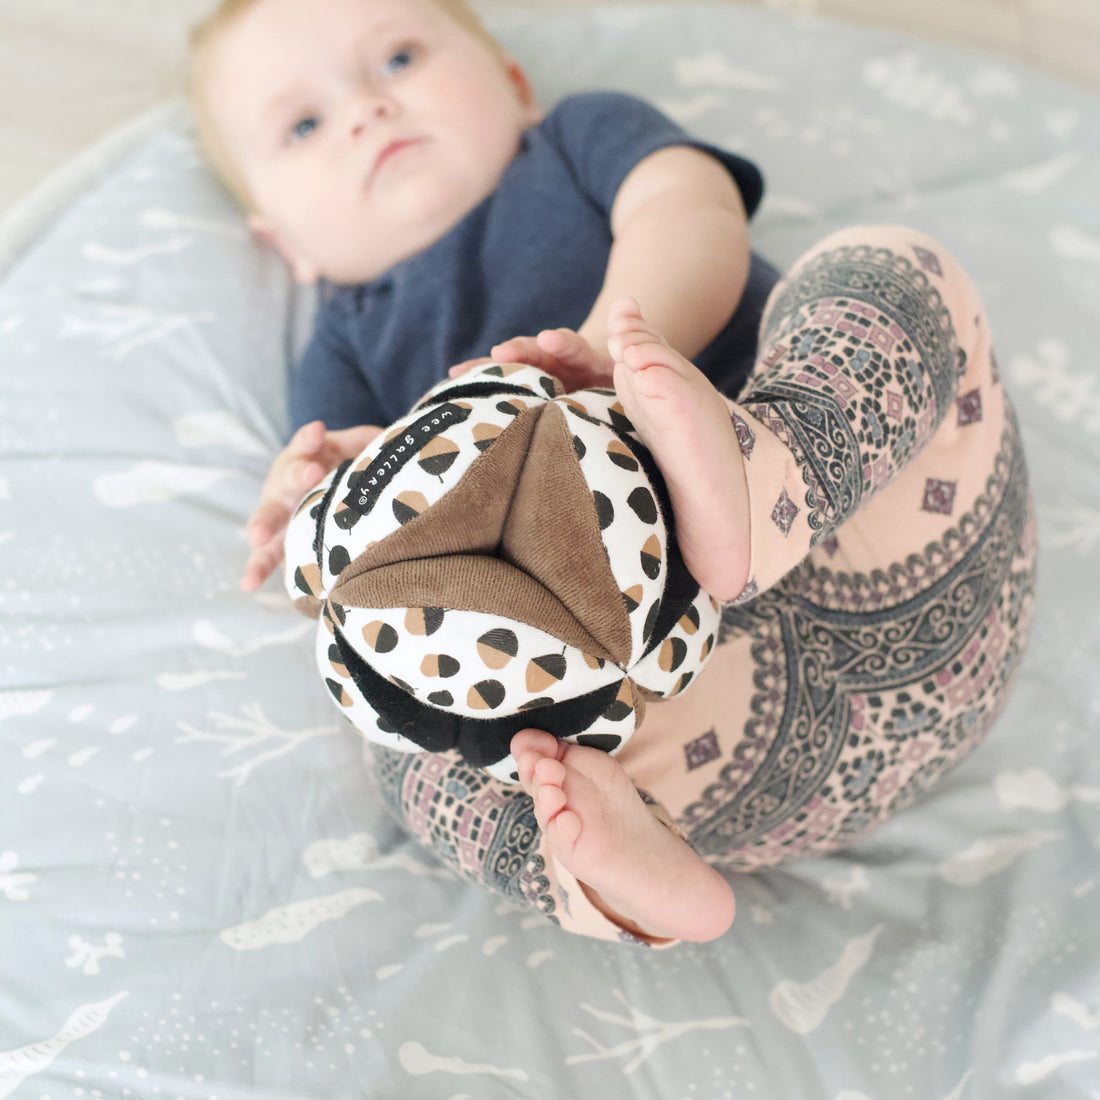 Clutch Ball - Acorn Baby & Toddler Wee Gallery   